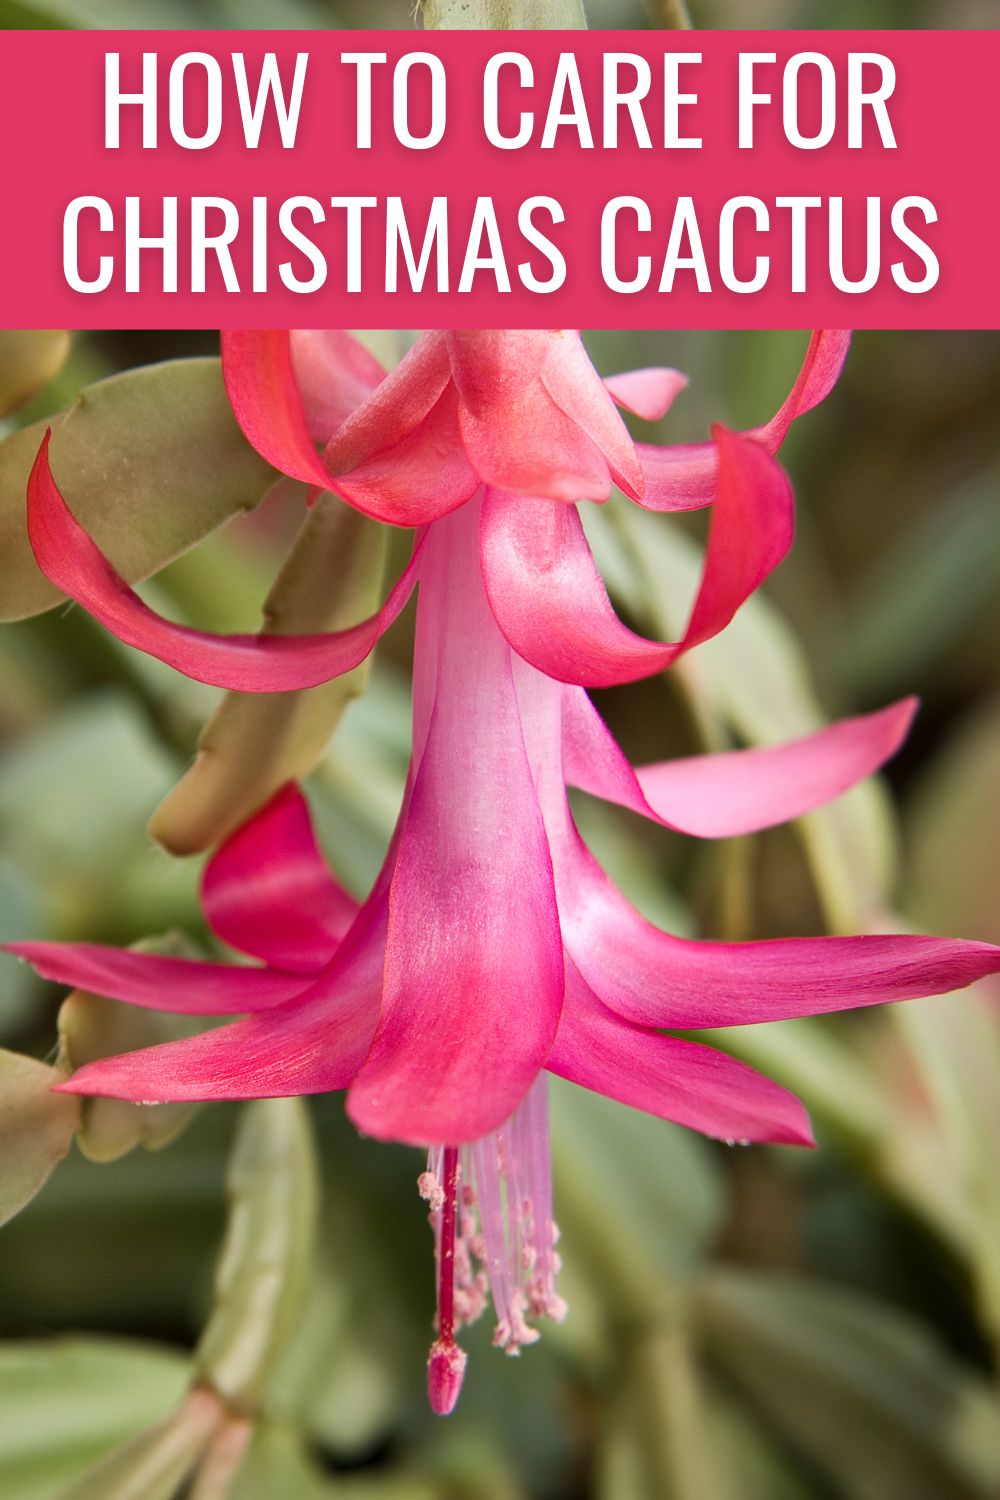 How to care for Christmas cactus.